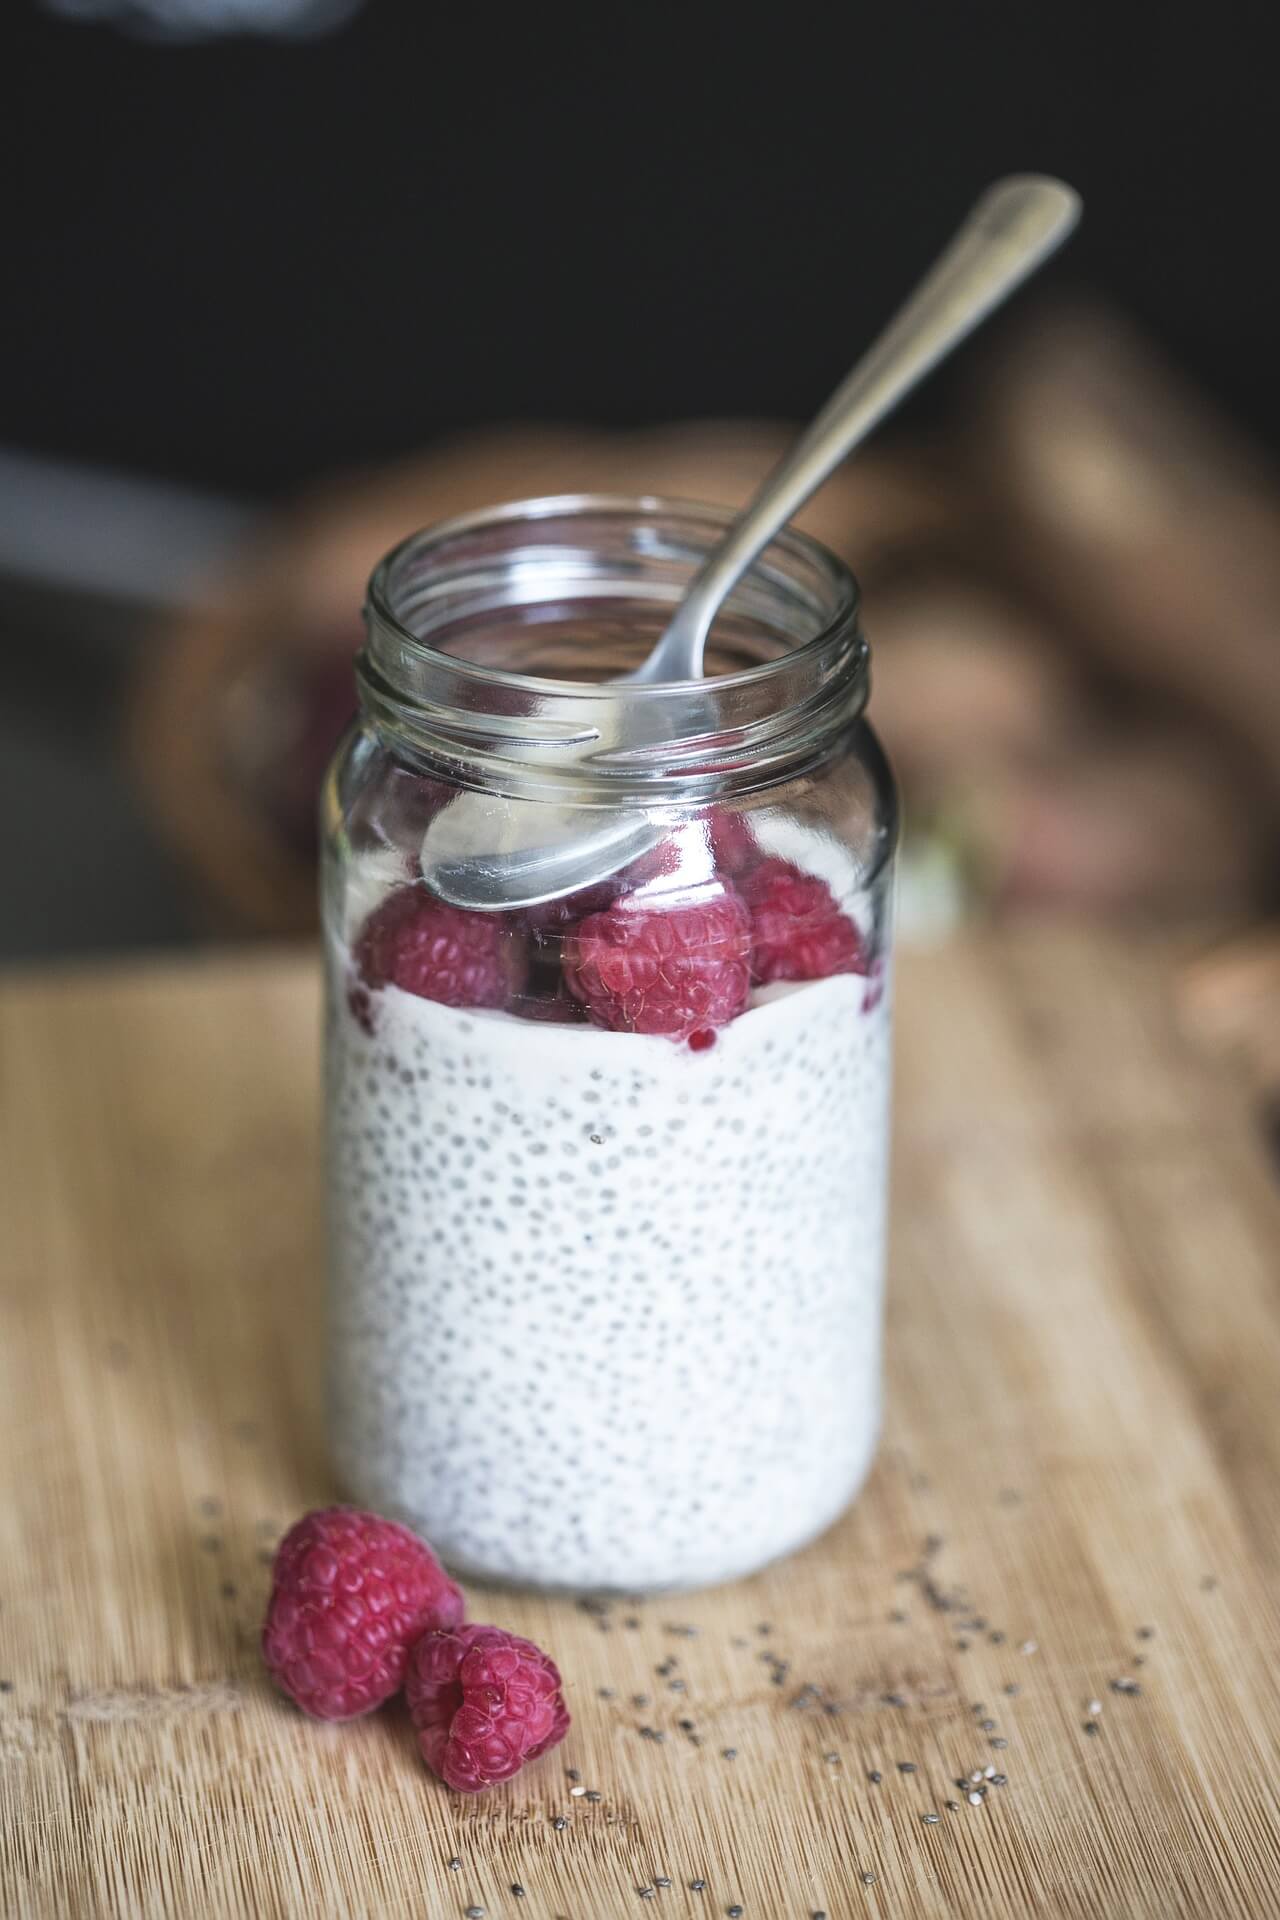 A jar of chia pudding with raspberries.